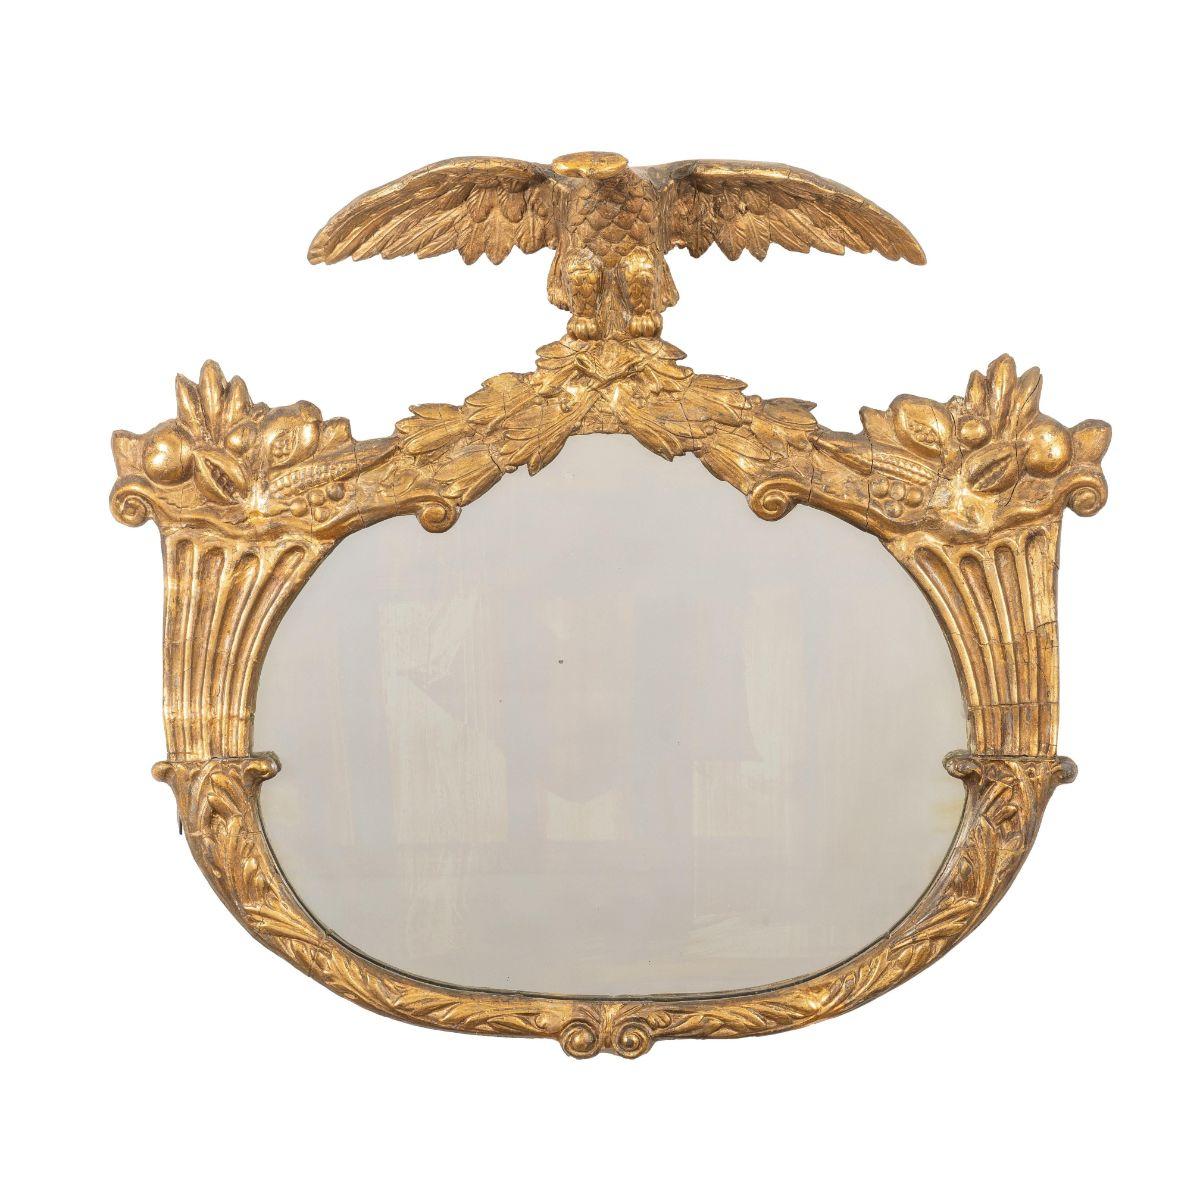 19th Century American Oval Gilt Gesso Mirror Frame with Eagle Crest For Sale 1